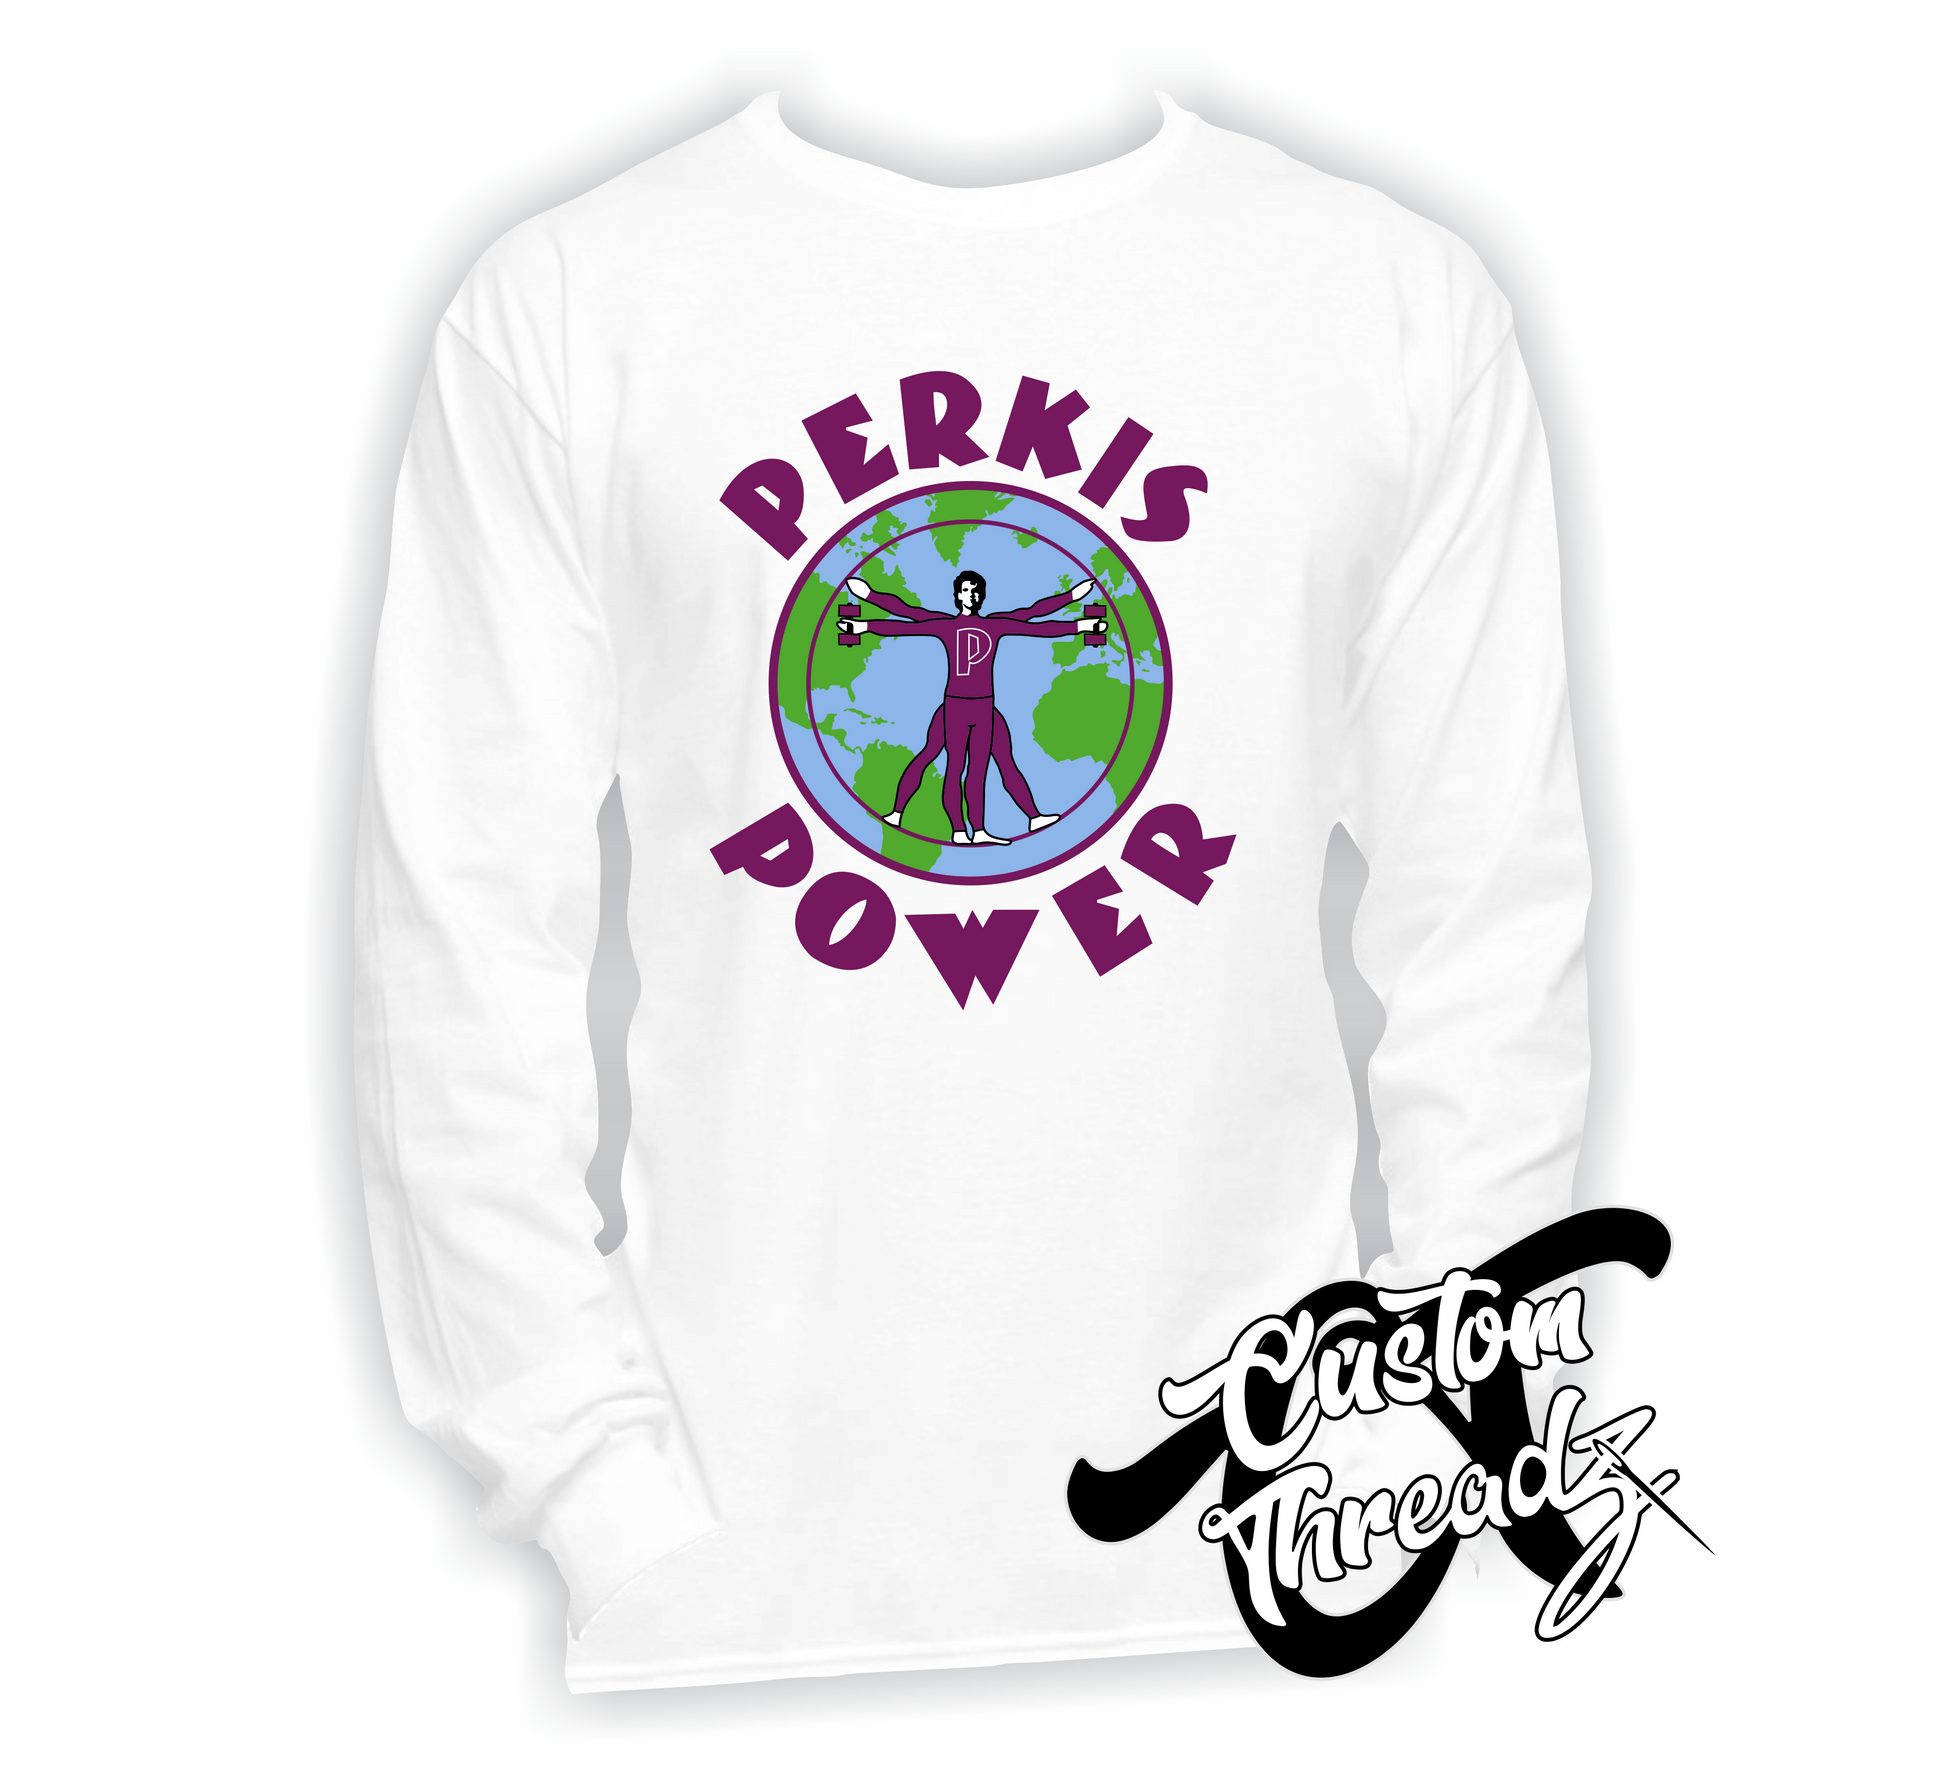 white long sleeve tee with perkis power heavyweights DTG printed design